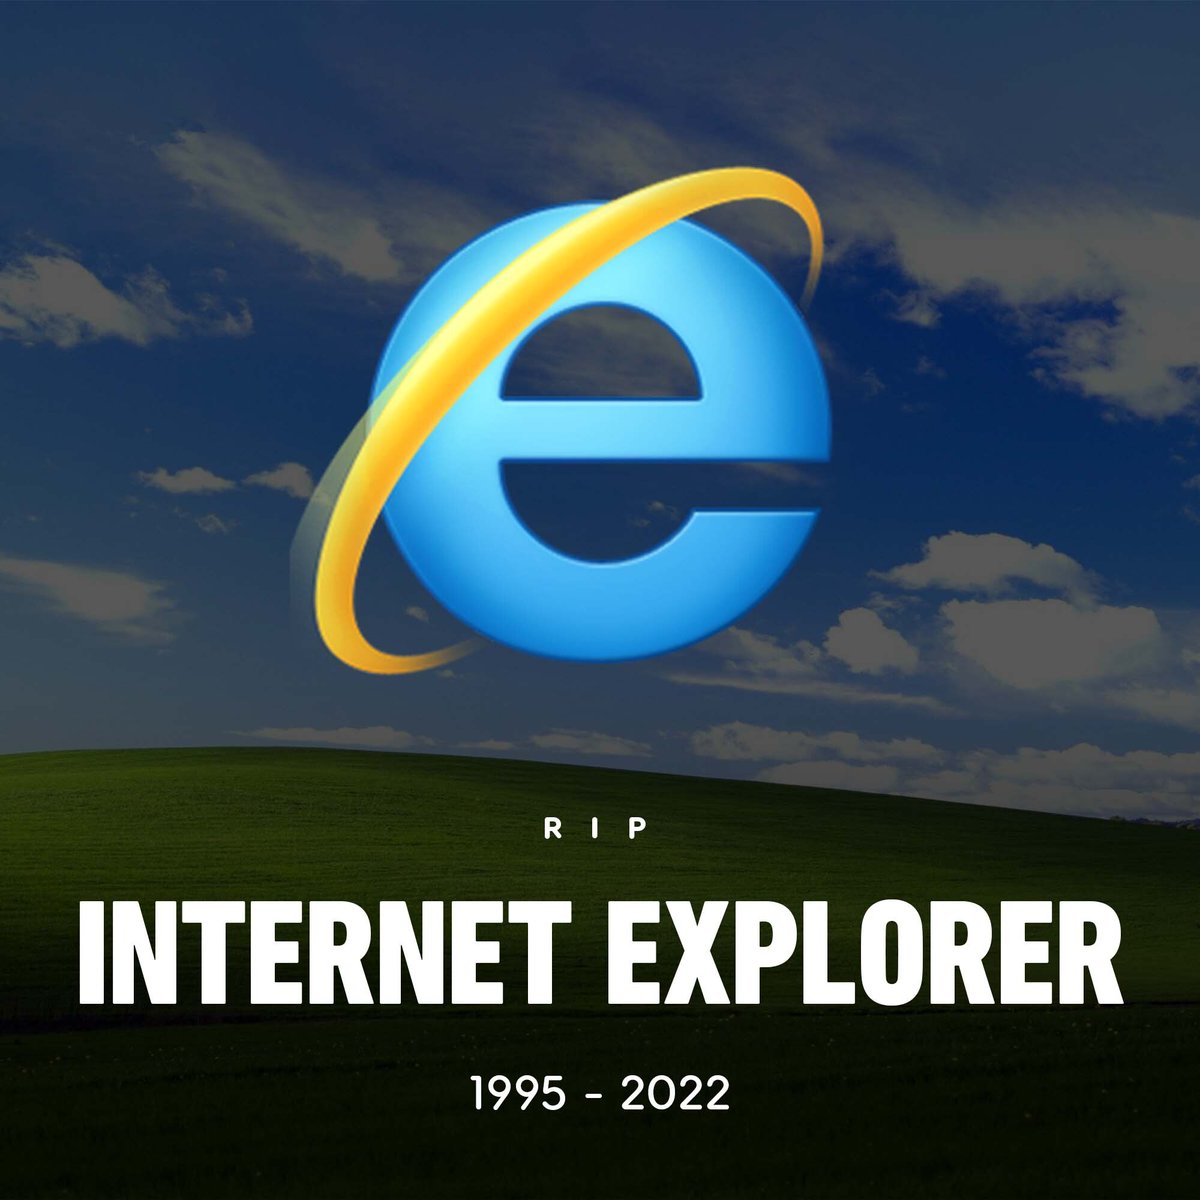 Microsoft is officially ending support for its iconic web browser Internet Explorer today, June 15. It was 26.